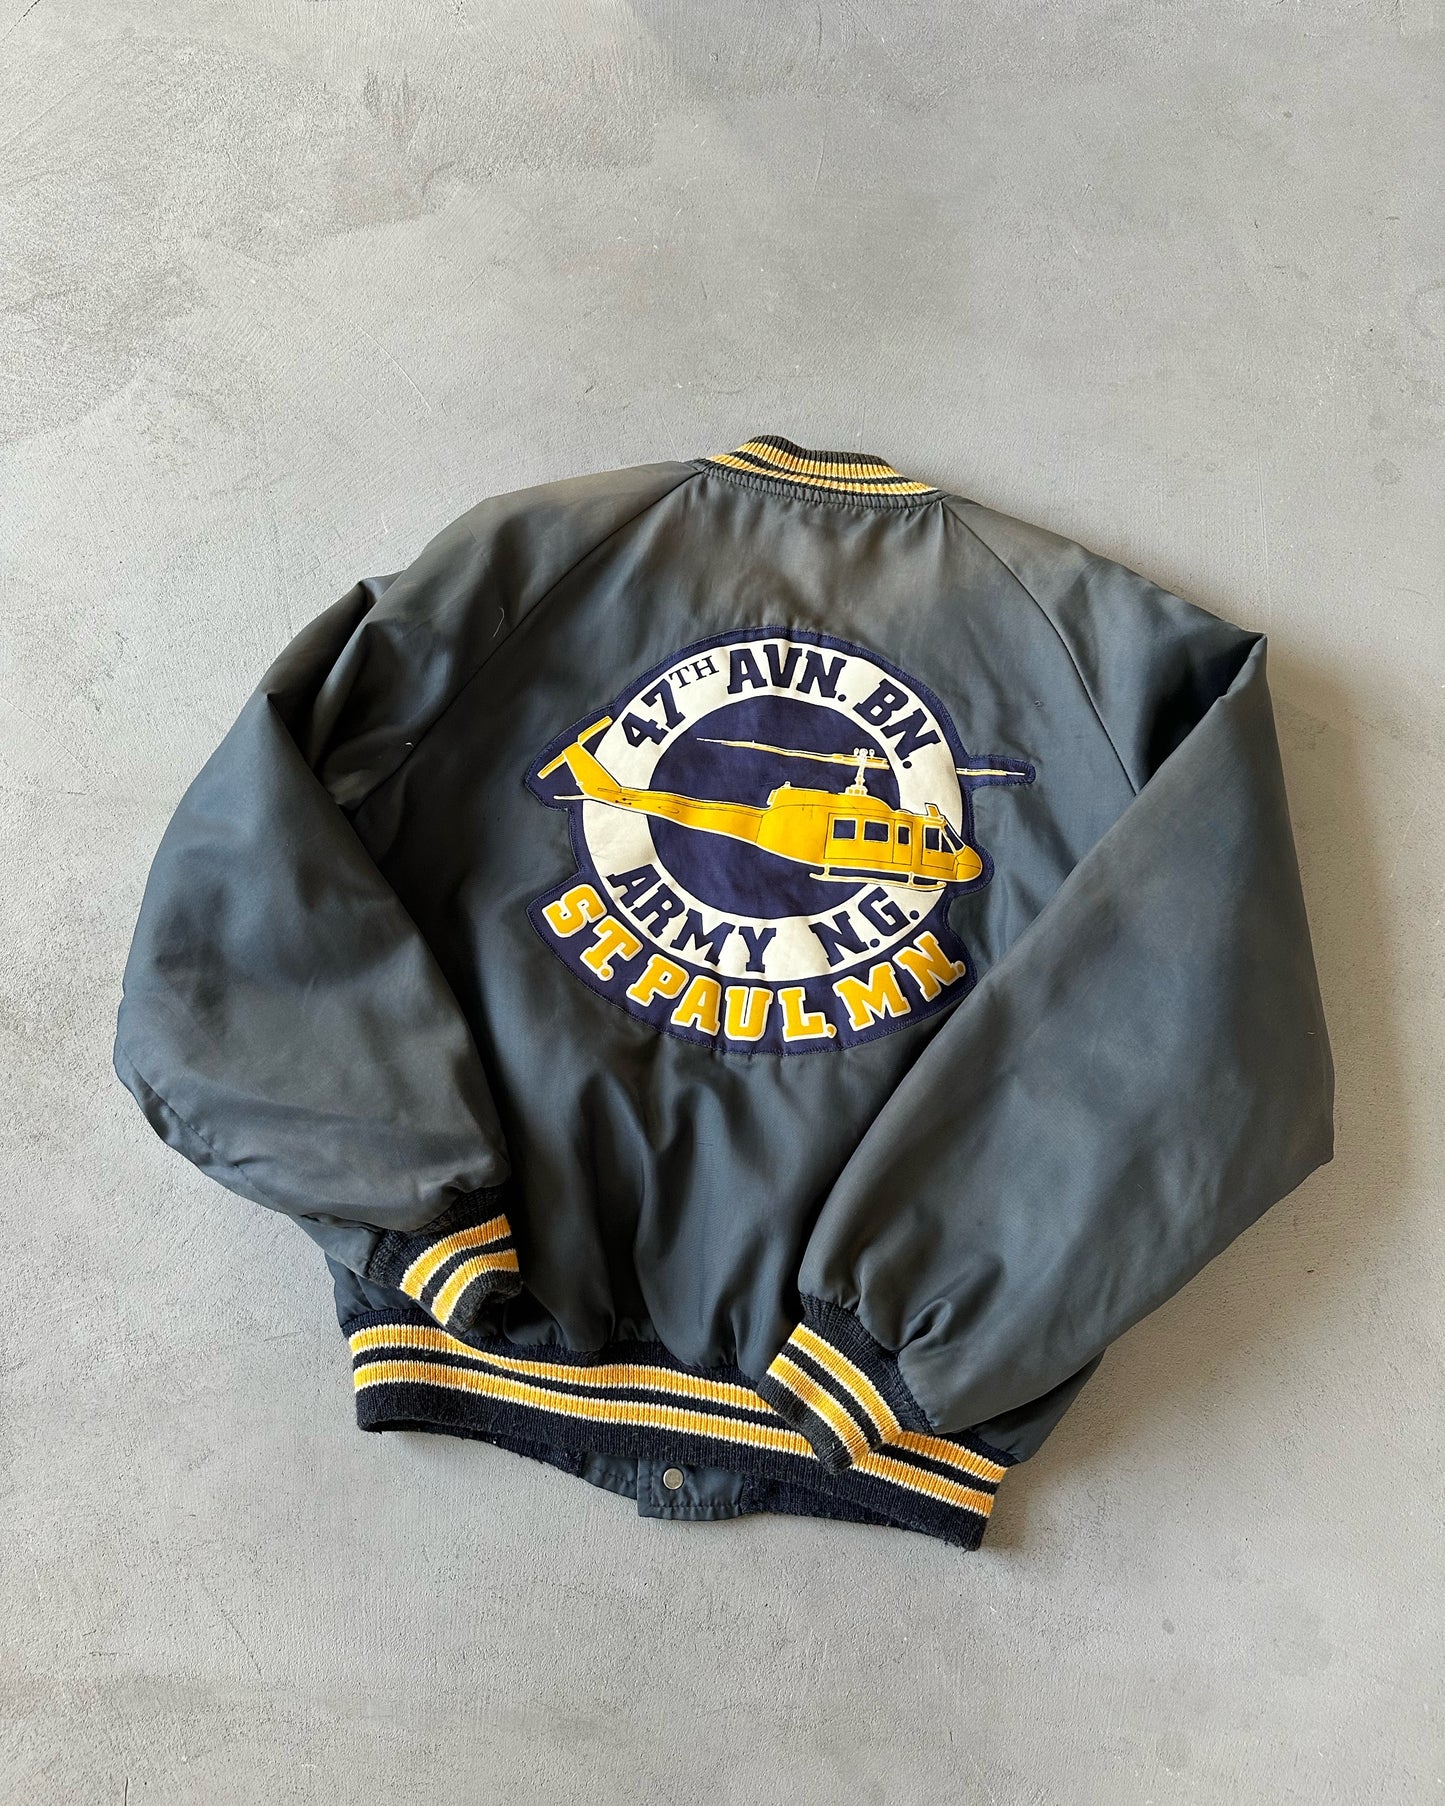 1970s - Faded Navy Butwin Army Bomber Jacket - M/L